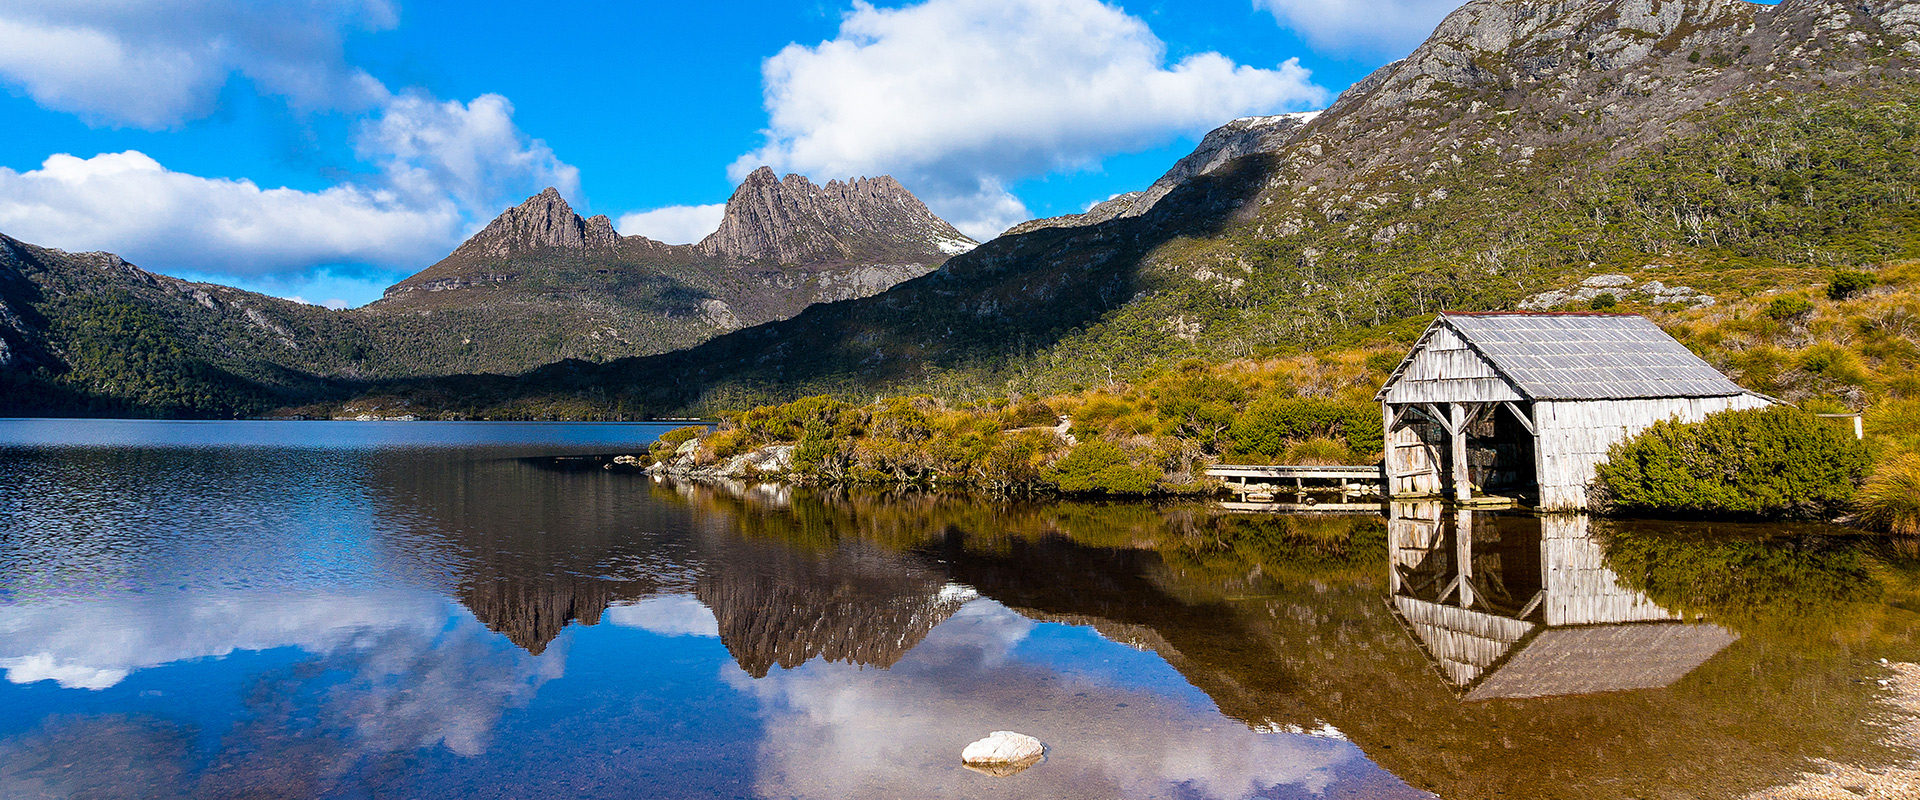 hc-t-au-tas-cradle-mountain-reflection-on-lake-with-shed-in-foreground-392502697-s-12-5.jpg